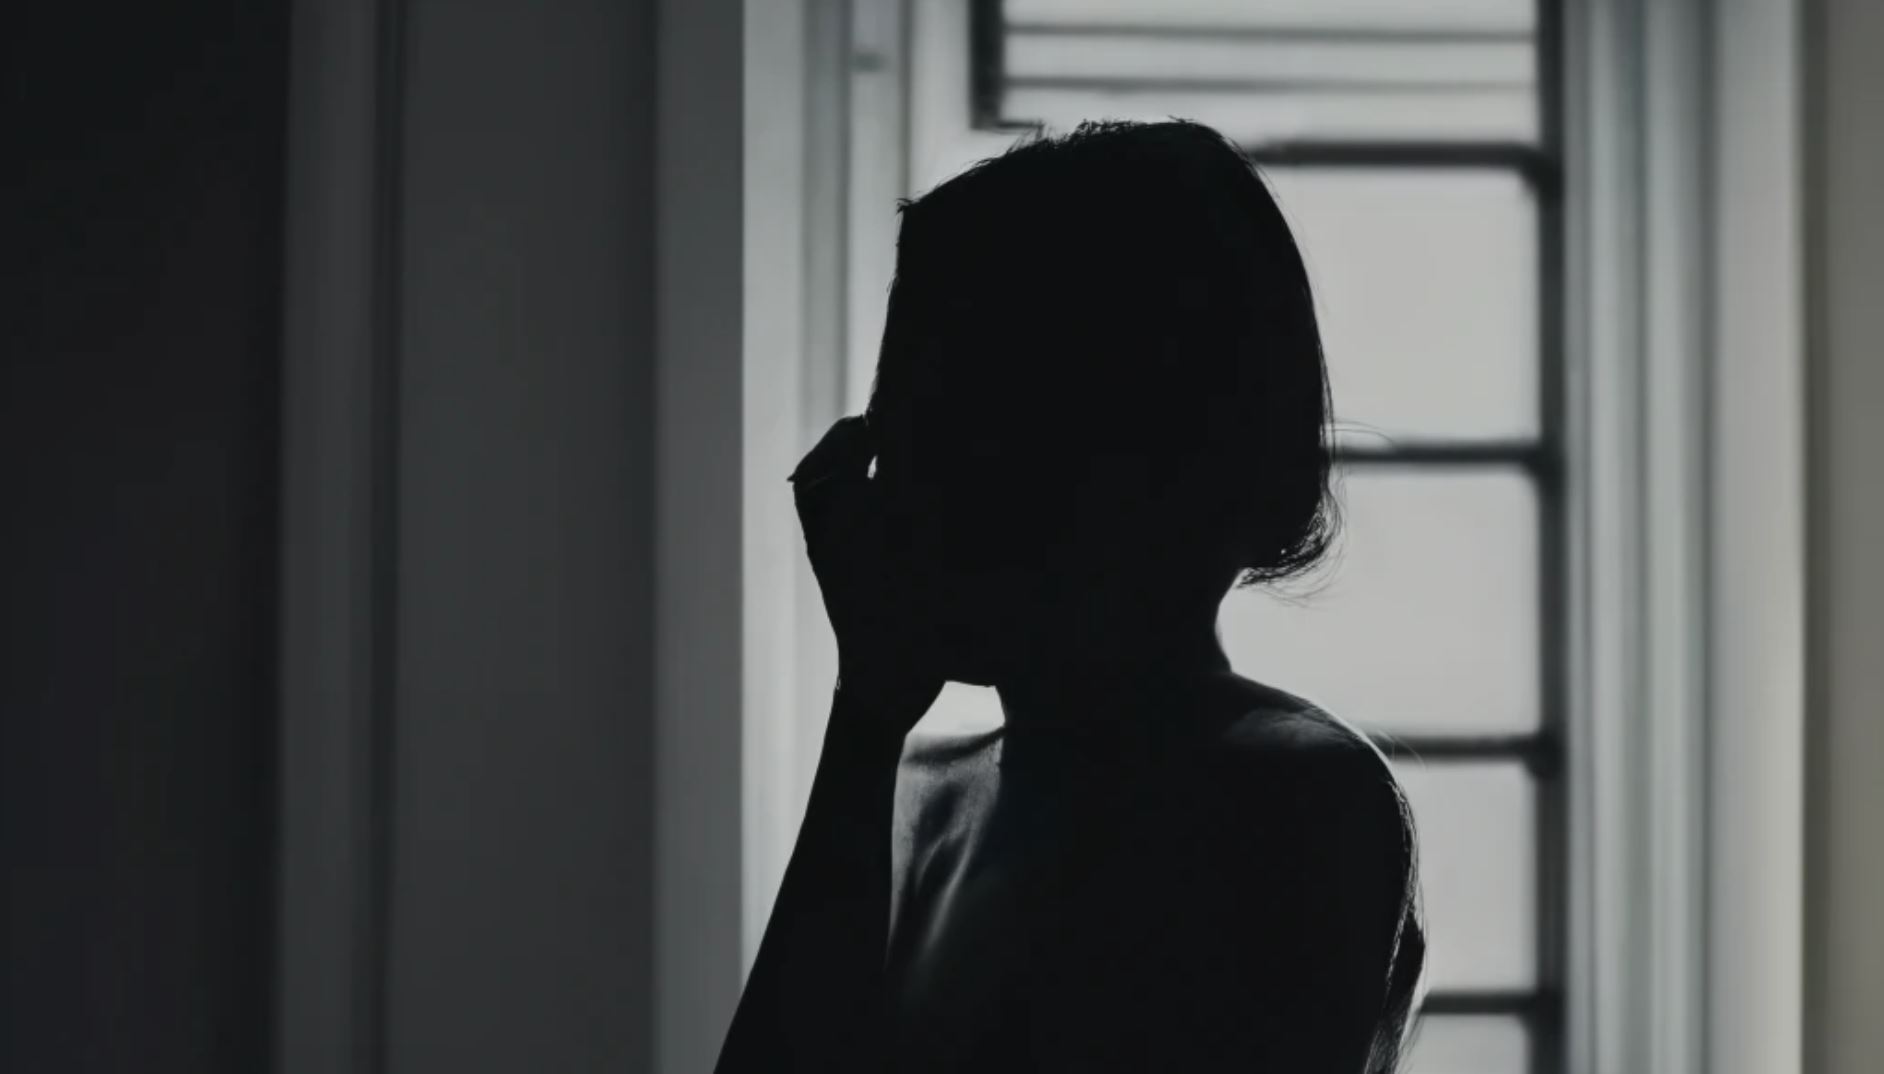 silhouette of a person in front of a window